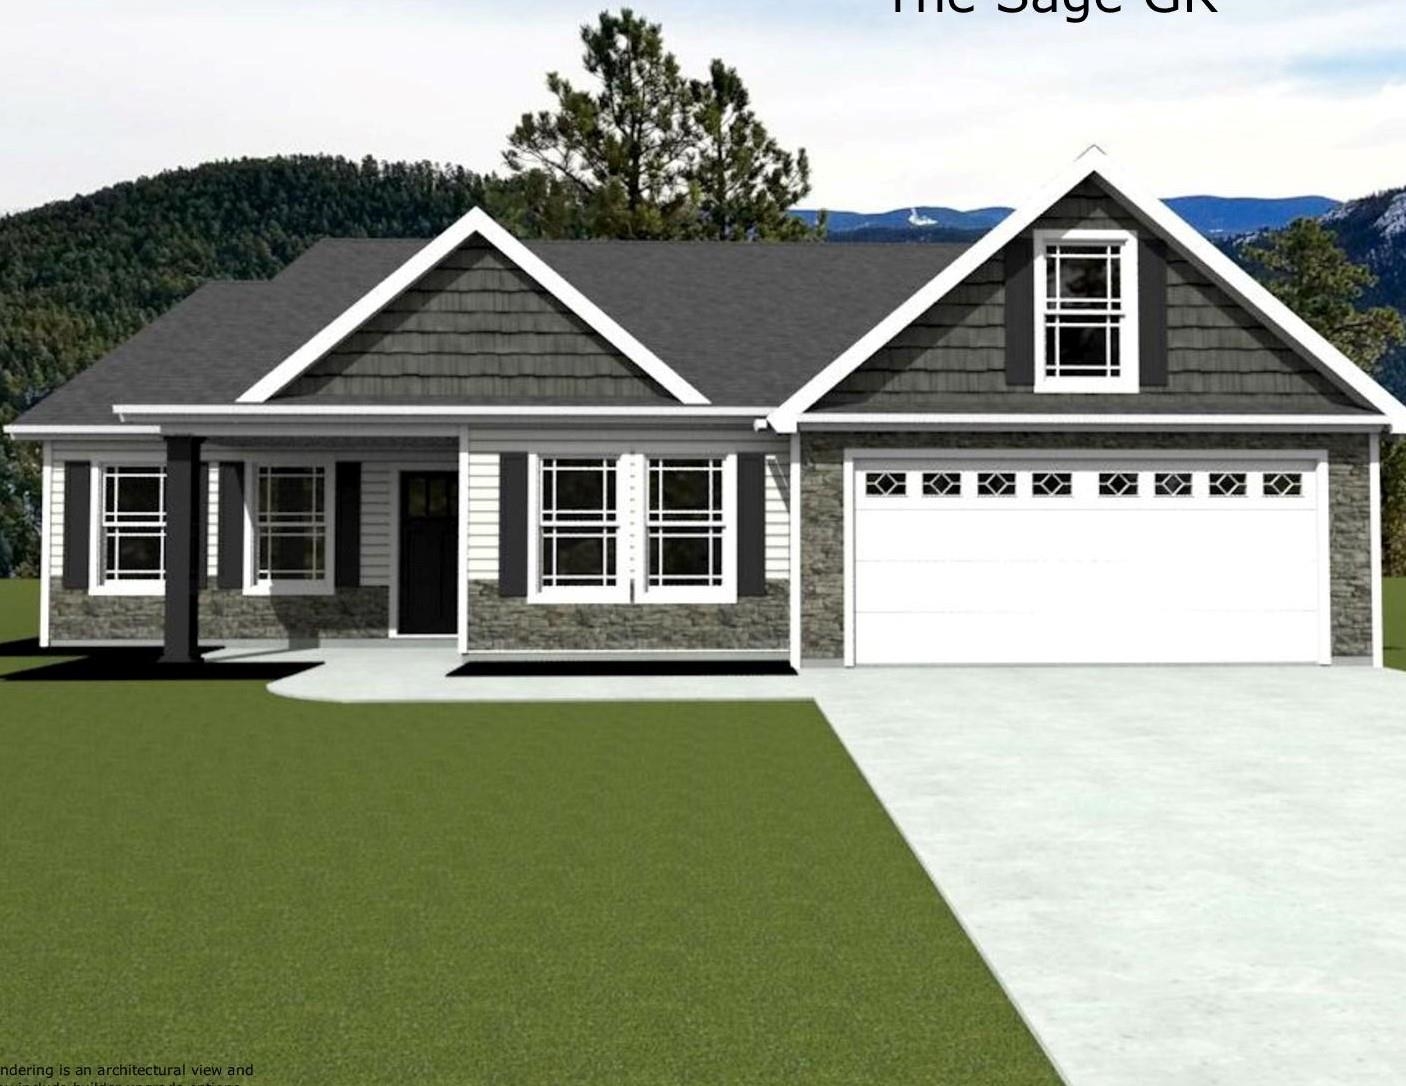 This is the SAGE floorplan. Open concept 3 bedroom 2 bathroom home, trey ceiling in master bedroom, gas fireplace, 12x12 back patio. Located in the NEW Elliott park community in Lyman just minutes from Spartanburg and Greenville. Call today for more info!